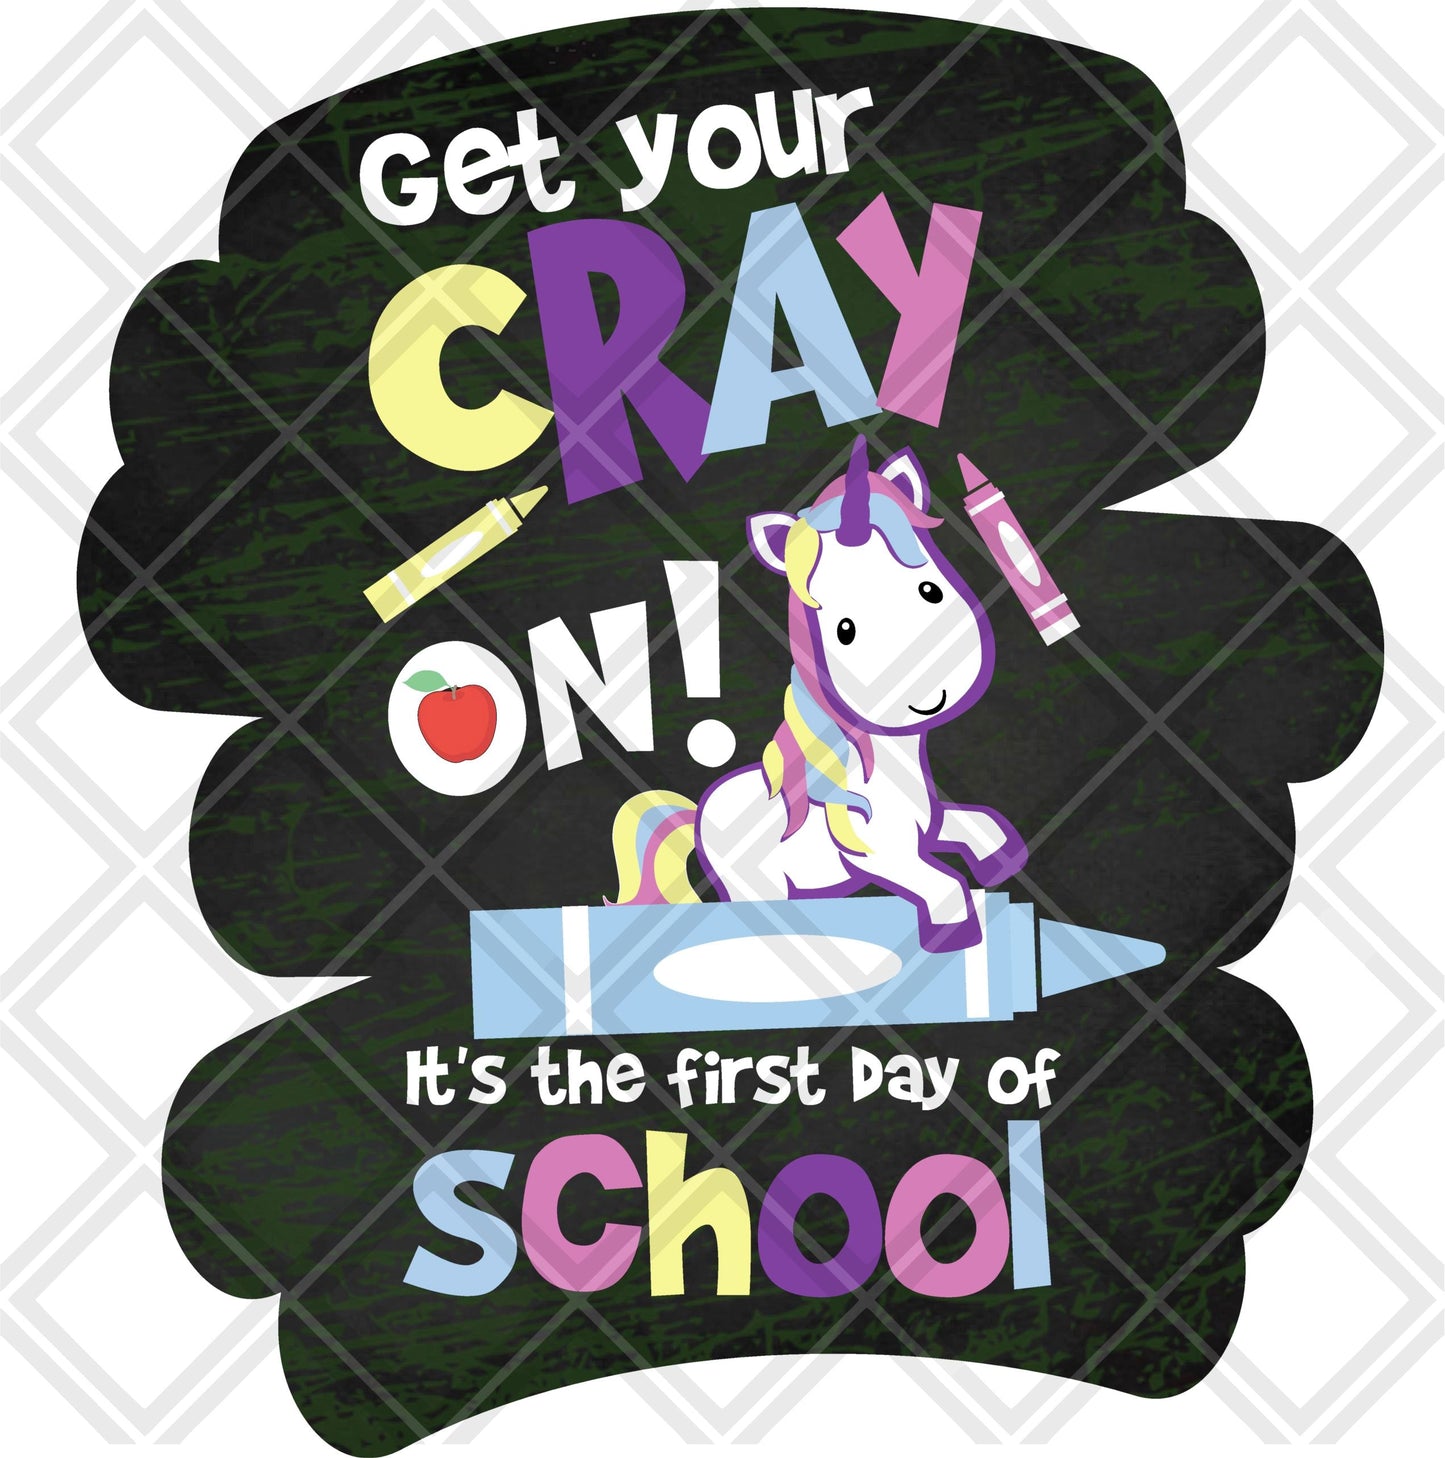 Get your cray on its the first day of school unicorn frame DTF TRANSFERPRINT TO ORDER